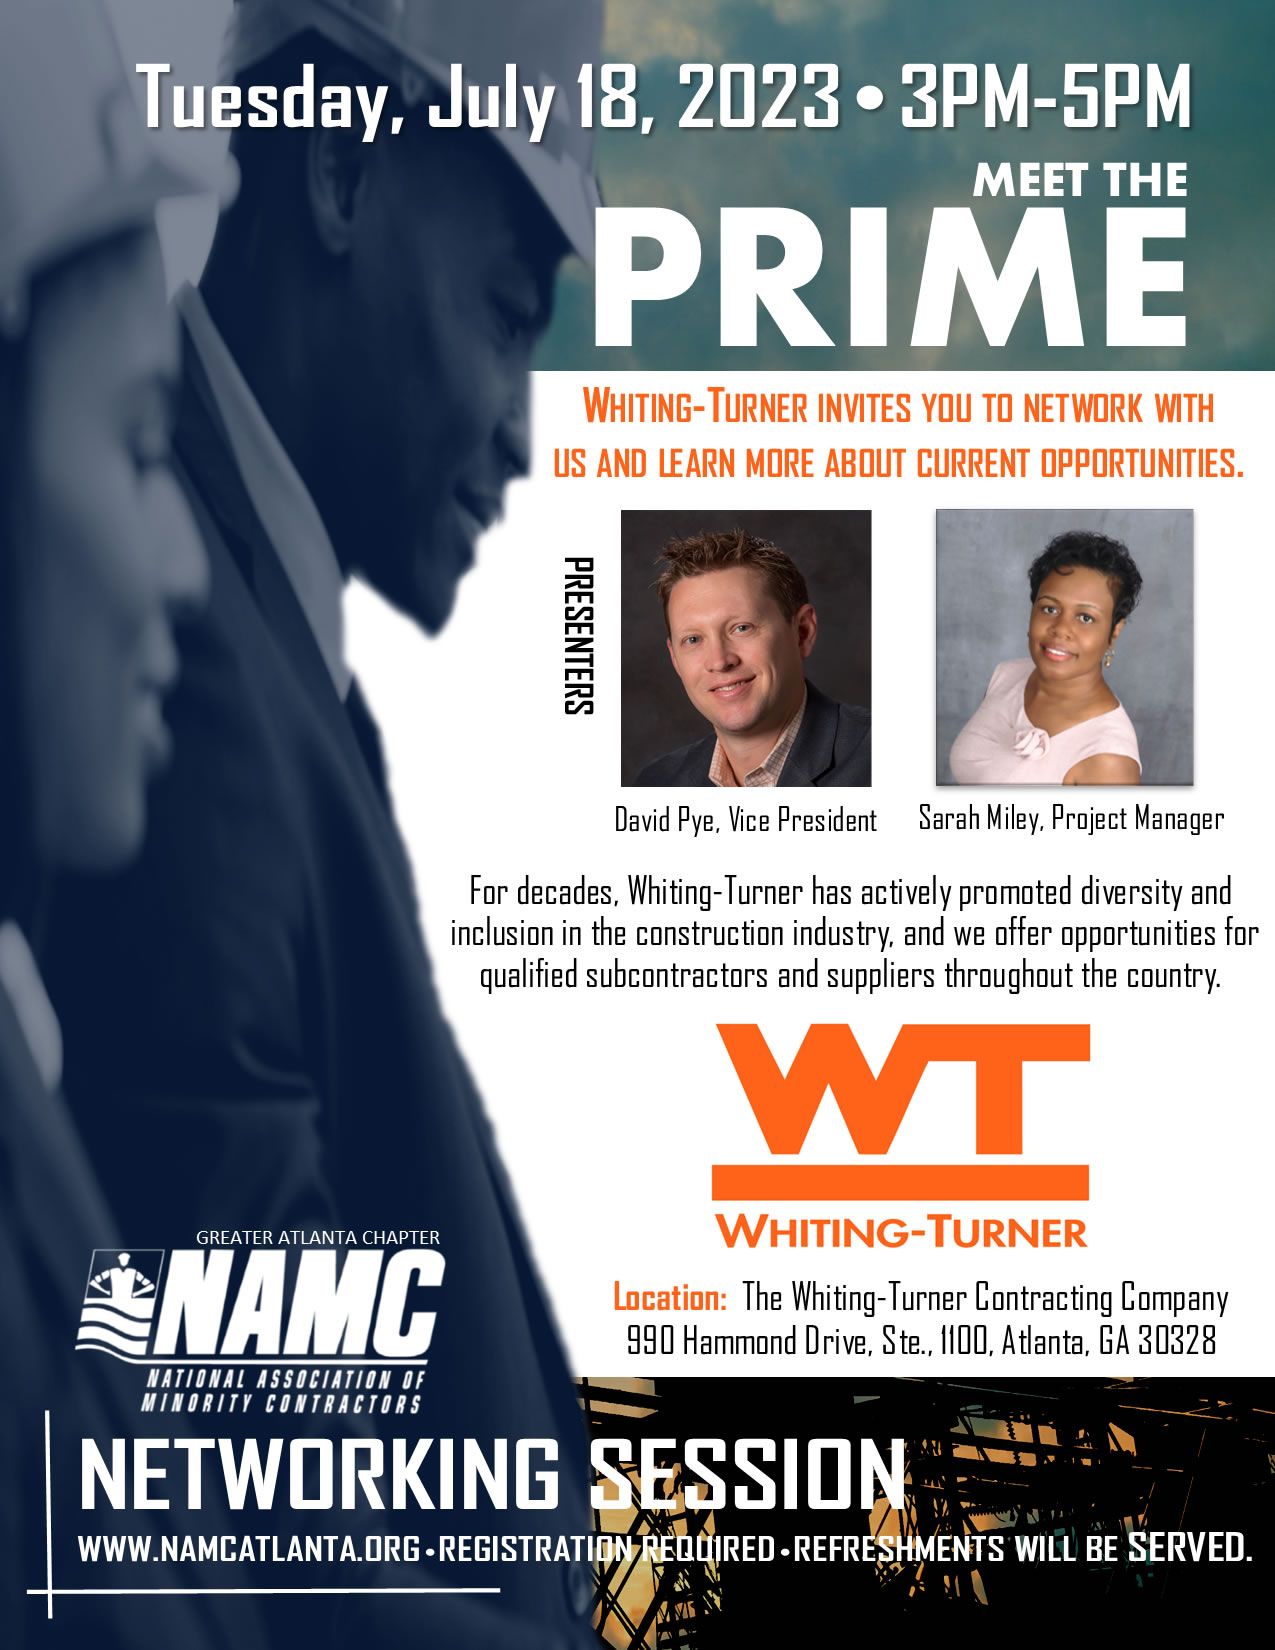 whiting-turner networking session with namc greater atlanta